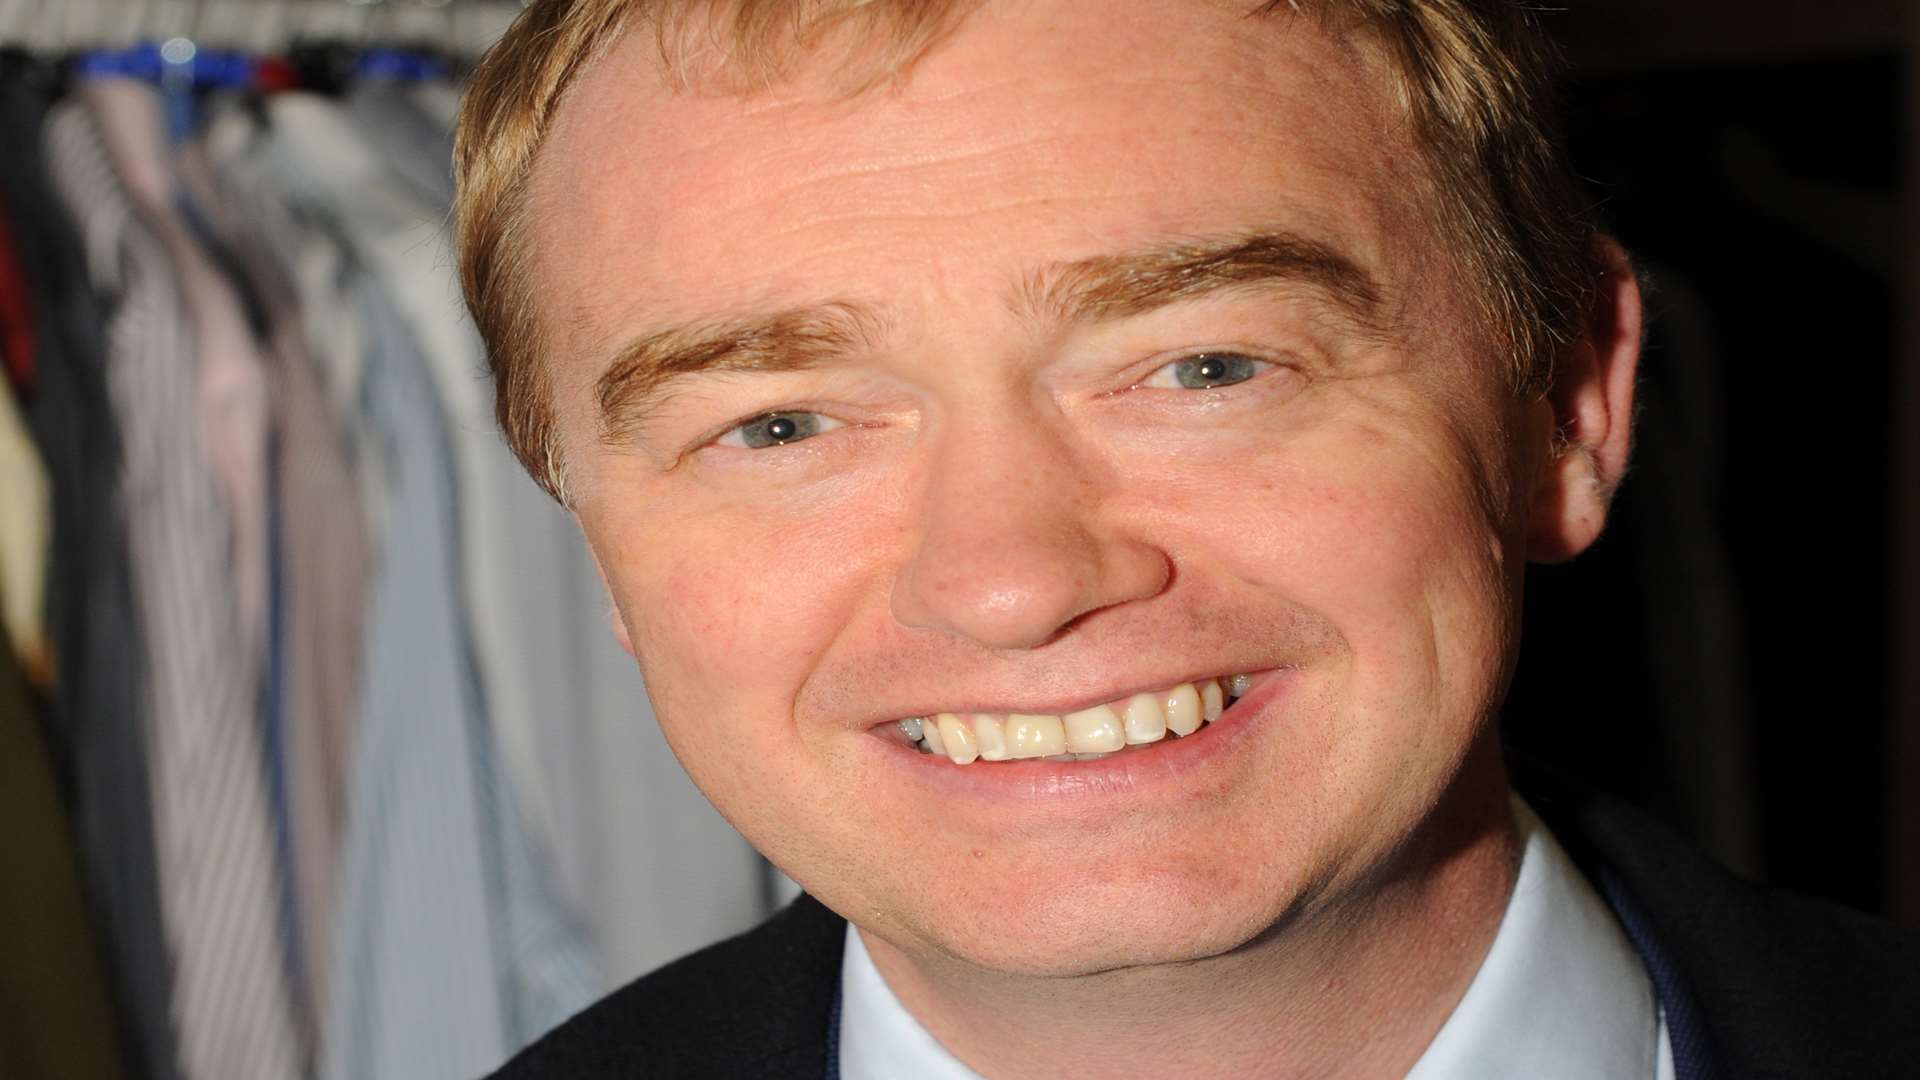 Tim Farron visited Maidstone and Canterbury